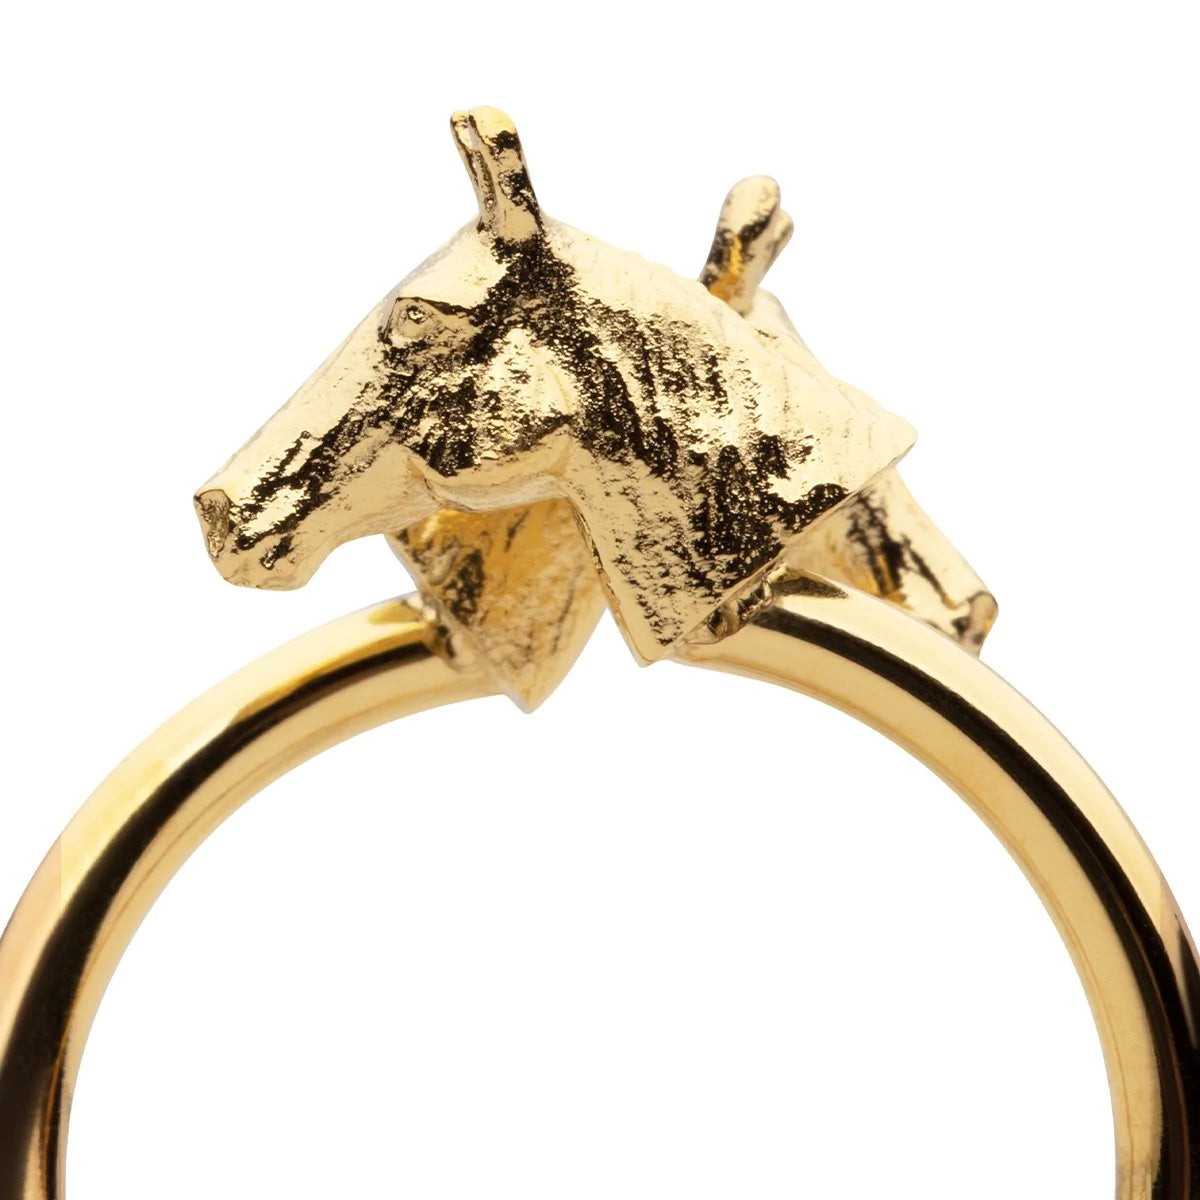 Gold Rings: 9ct Yellow Gold Trotter Horse & Horseshoe Ring